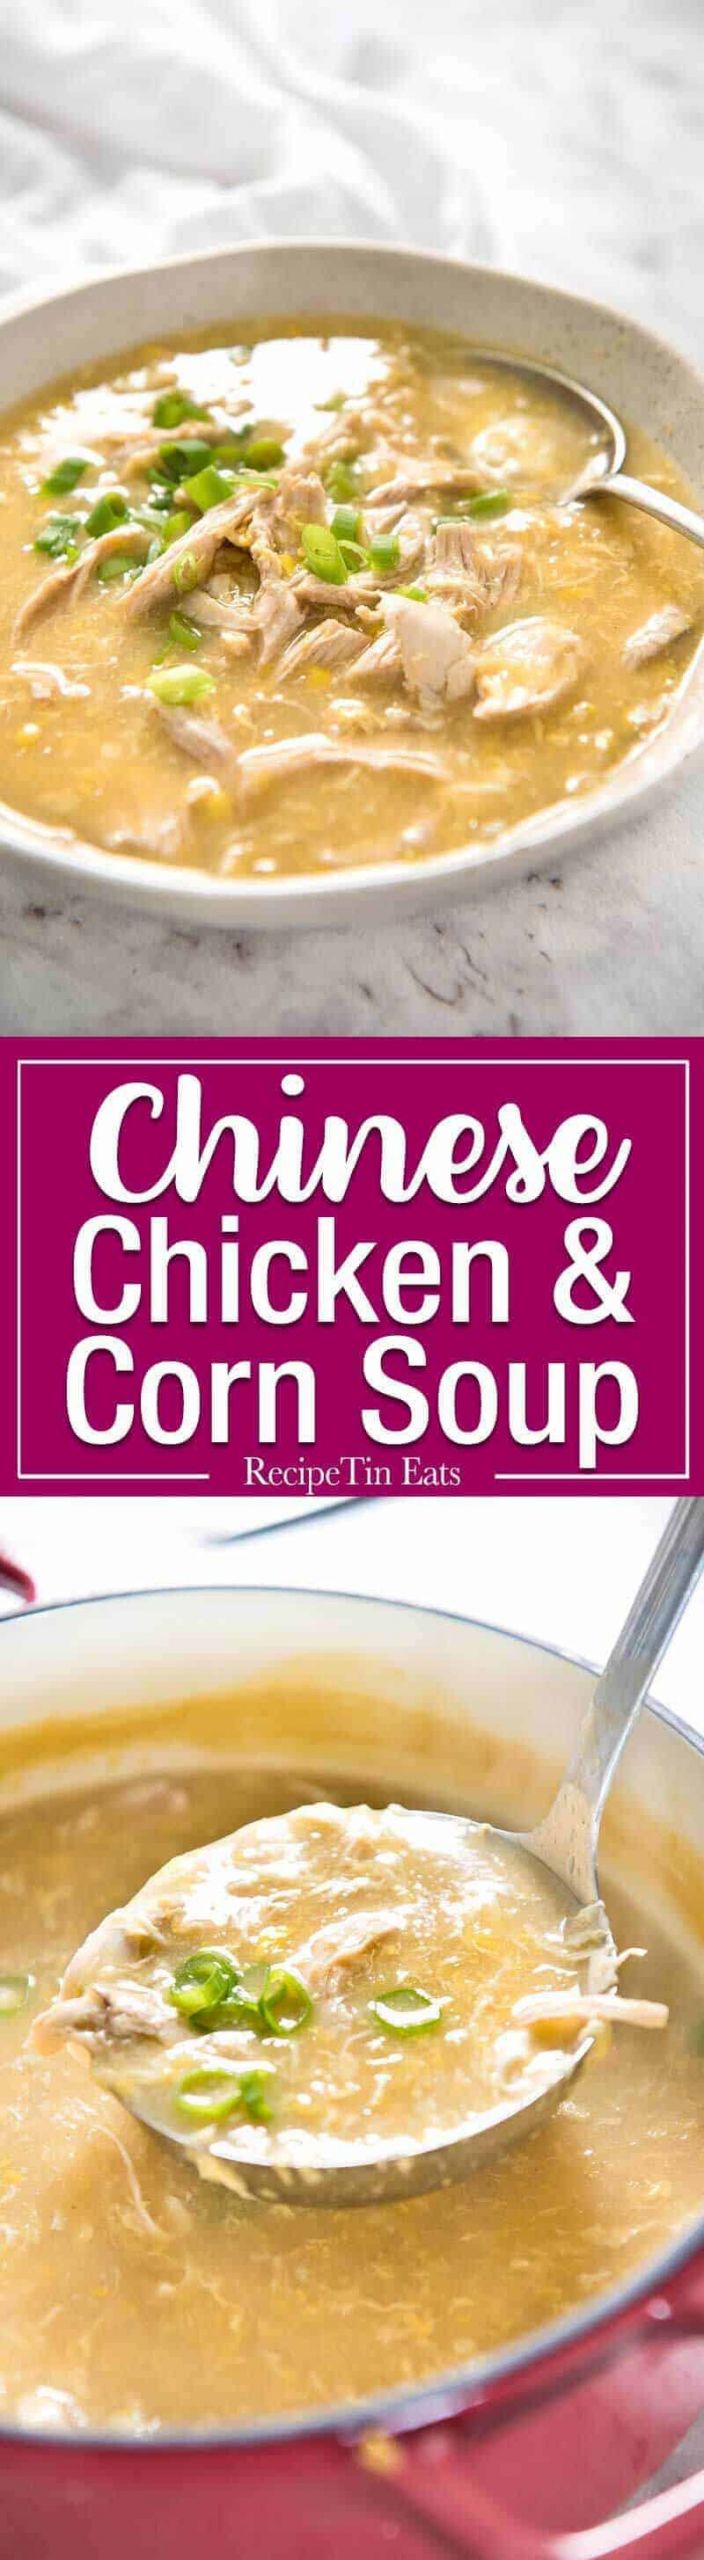 Chinese Chicken Corn Soup
 Chinese Corn Soup with Chicken